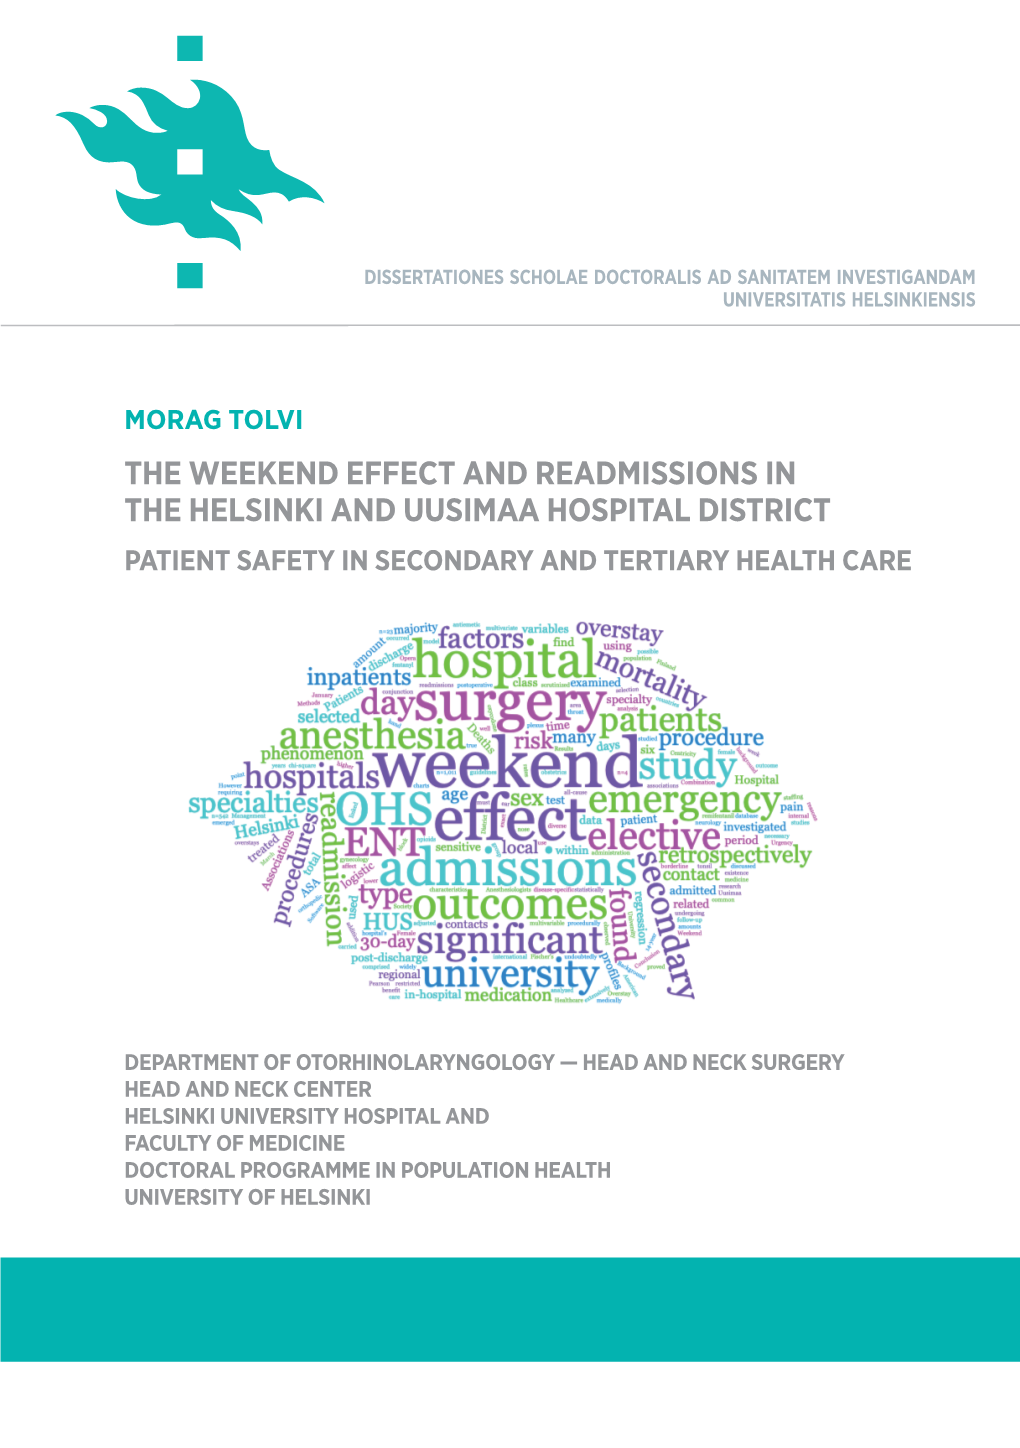 The Weekend Effect and Readmissions in the Helsinki and Uusimaa Hospital District — Patient Safety in Secondary and Tertiary Health Care 67/2020 Online)